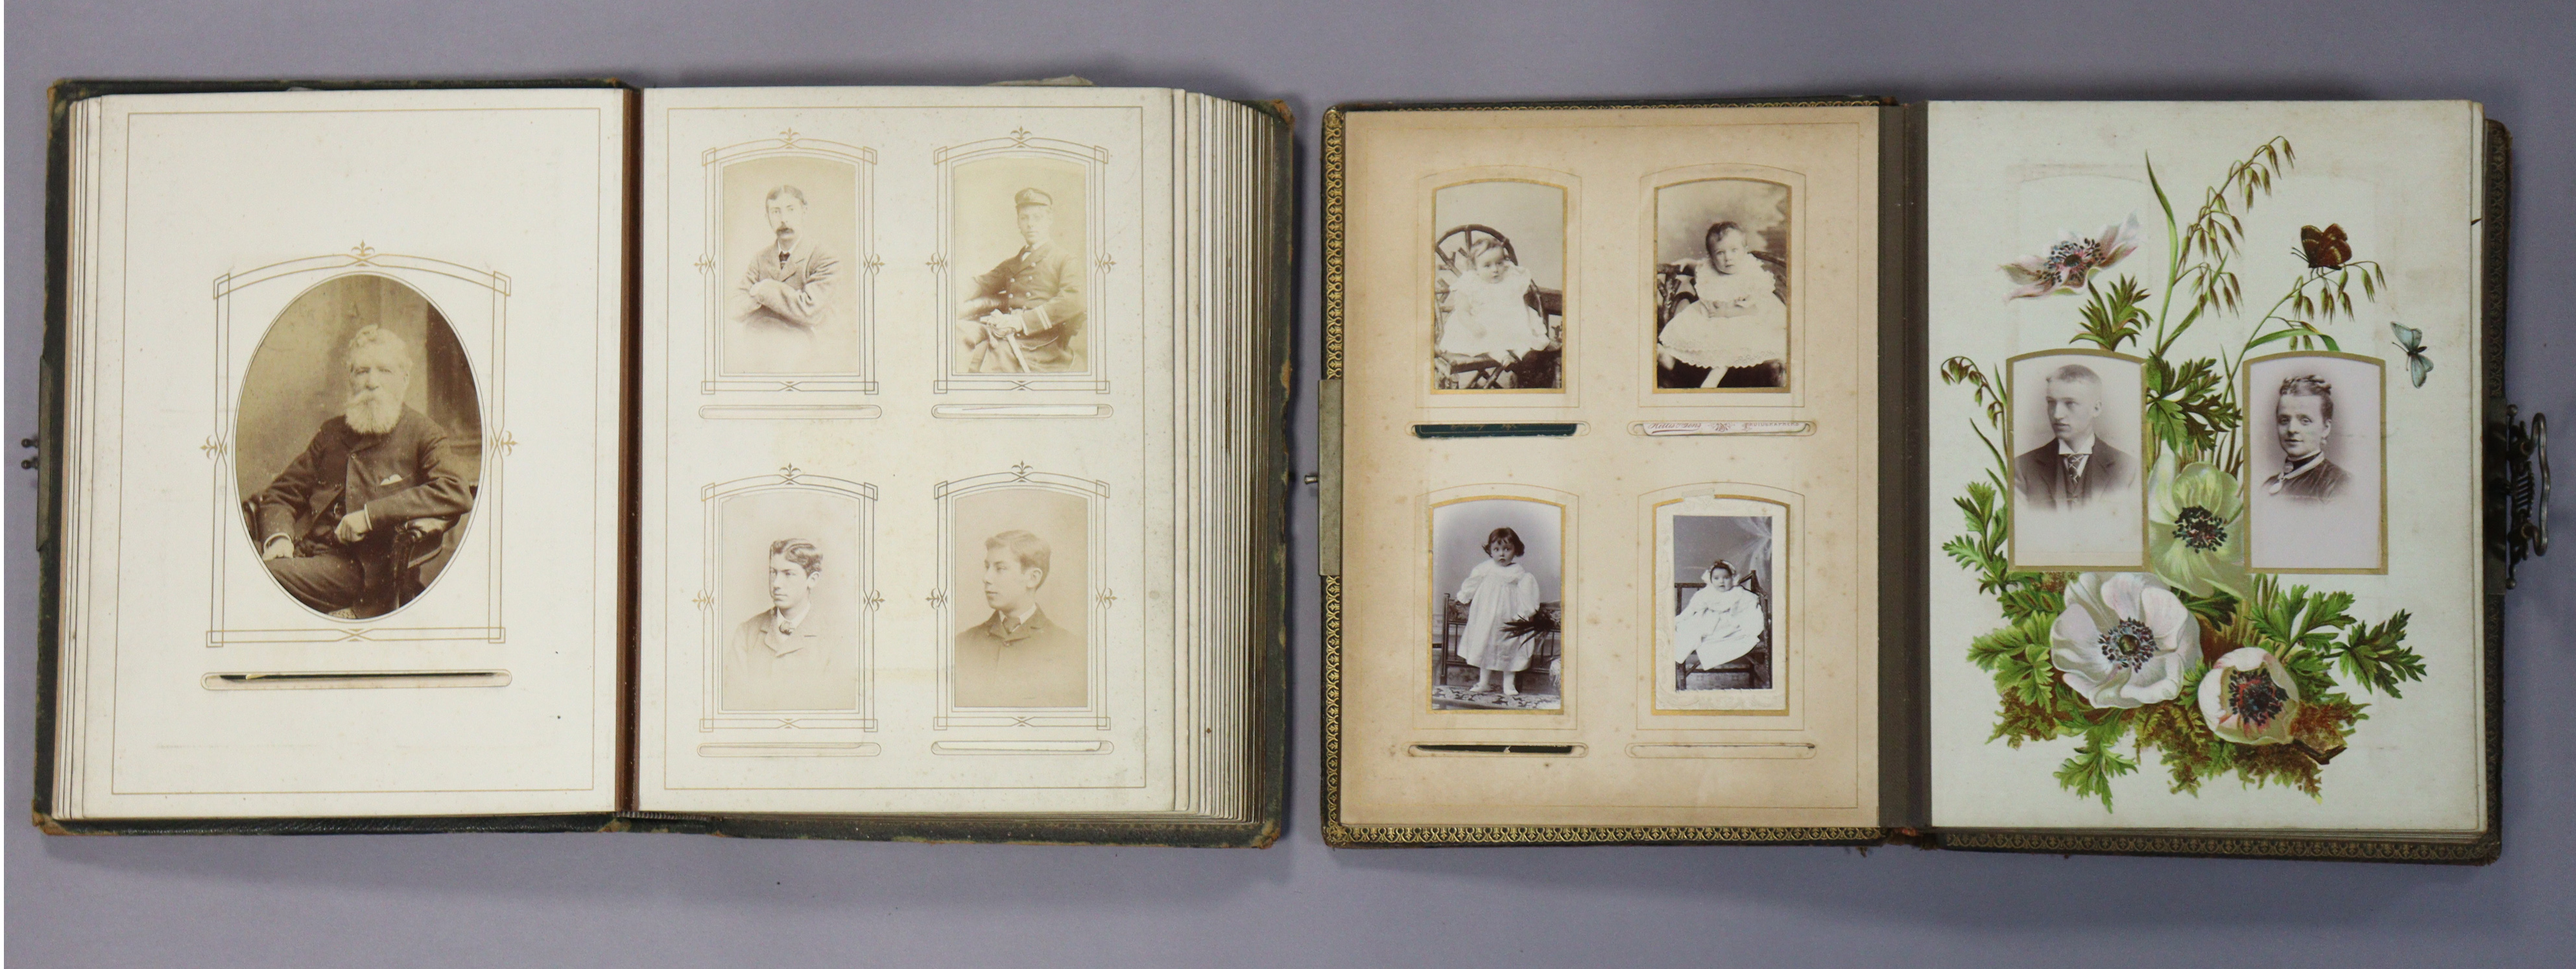 Two late 19th/early 20th century leather-bound family photograph albums containing a total of one